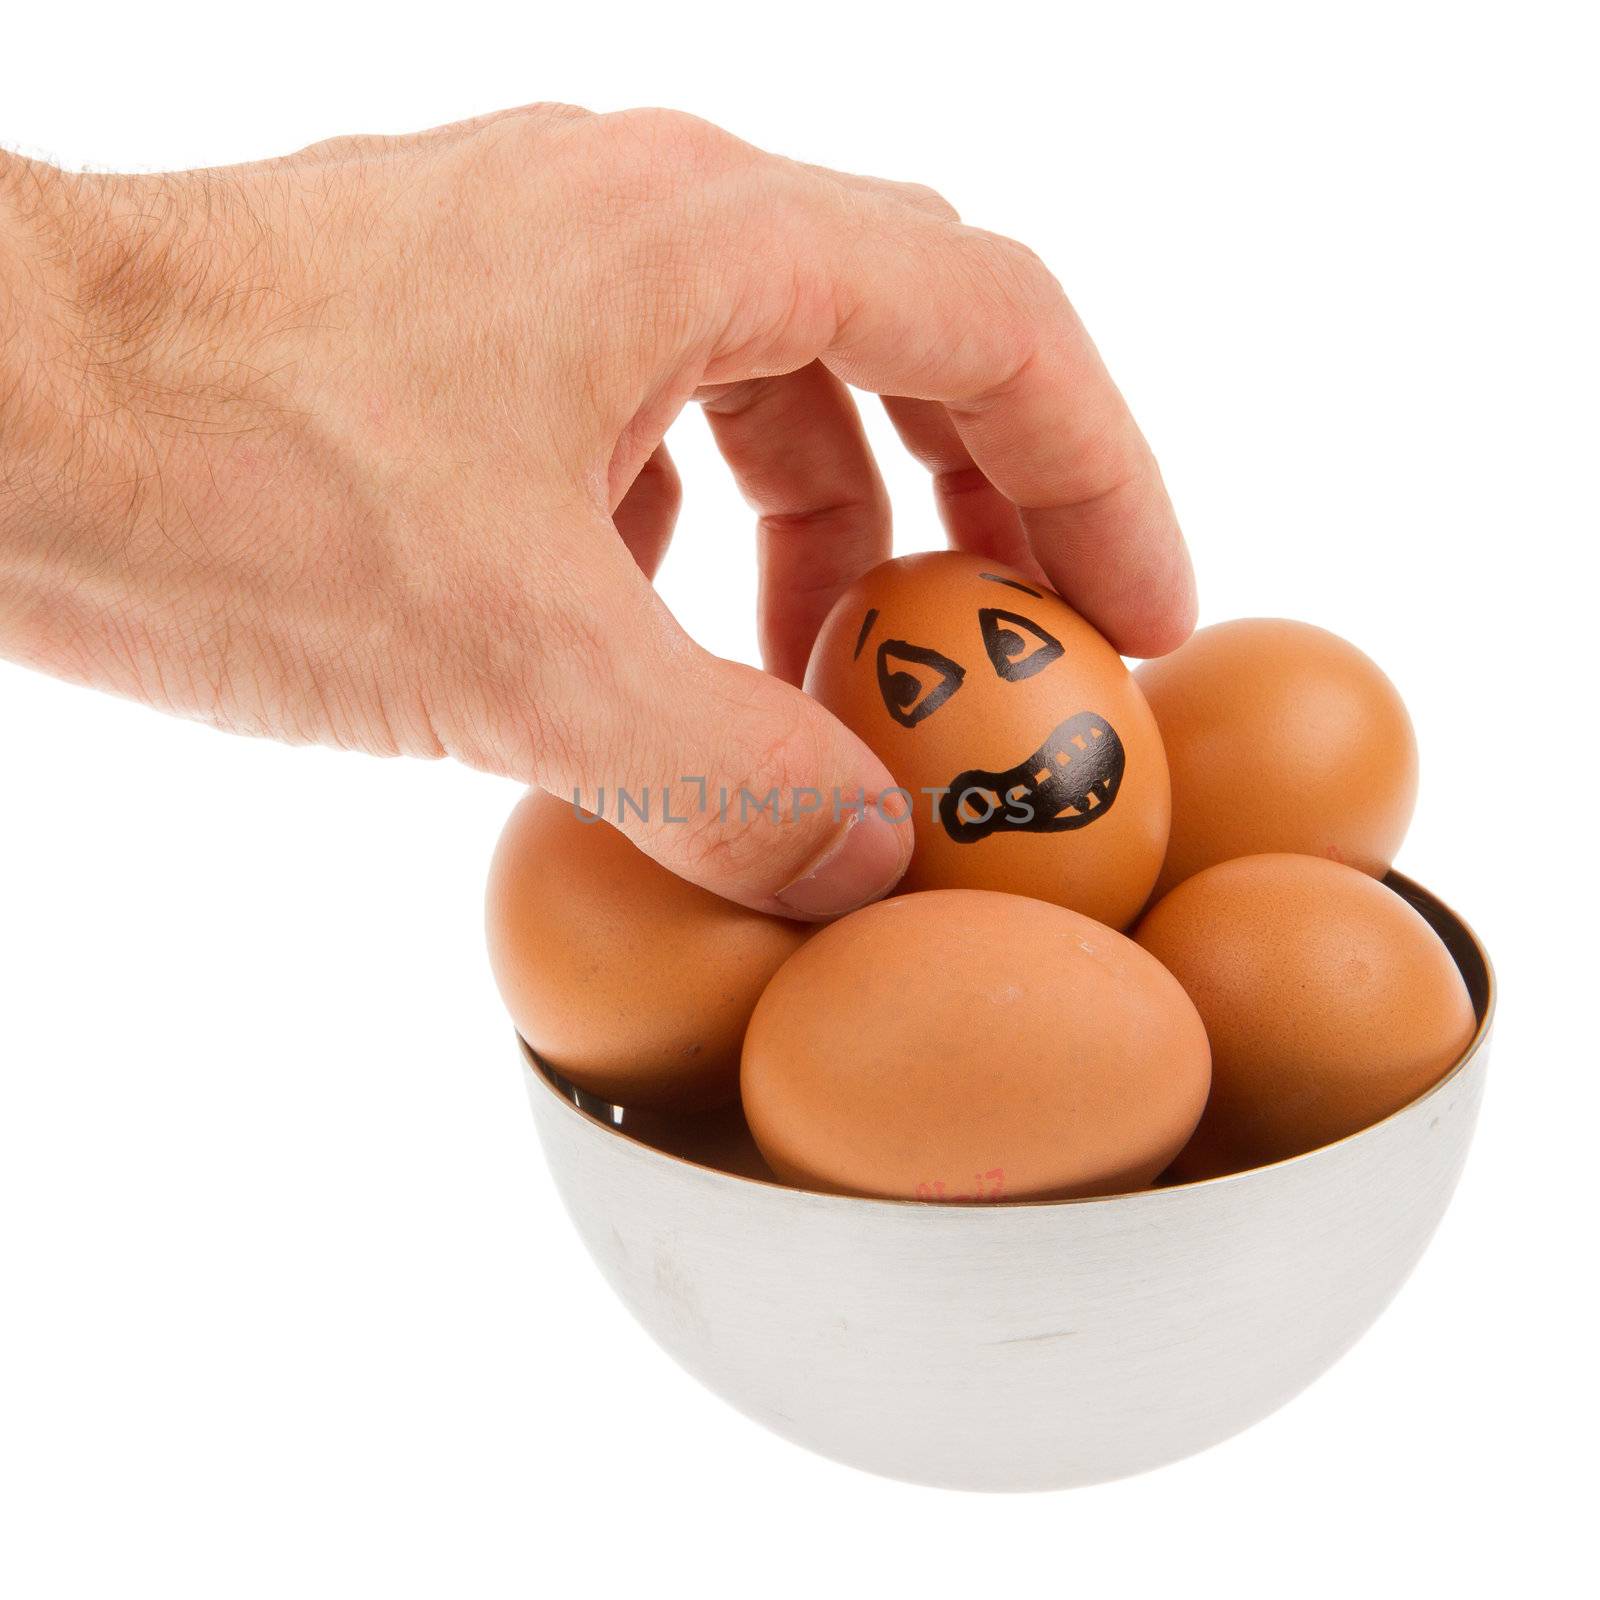 Scared egg, waiting to be grabbed by a hand, isolated